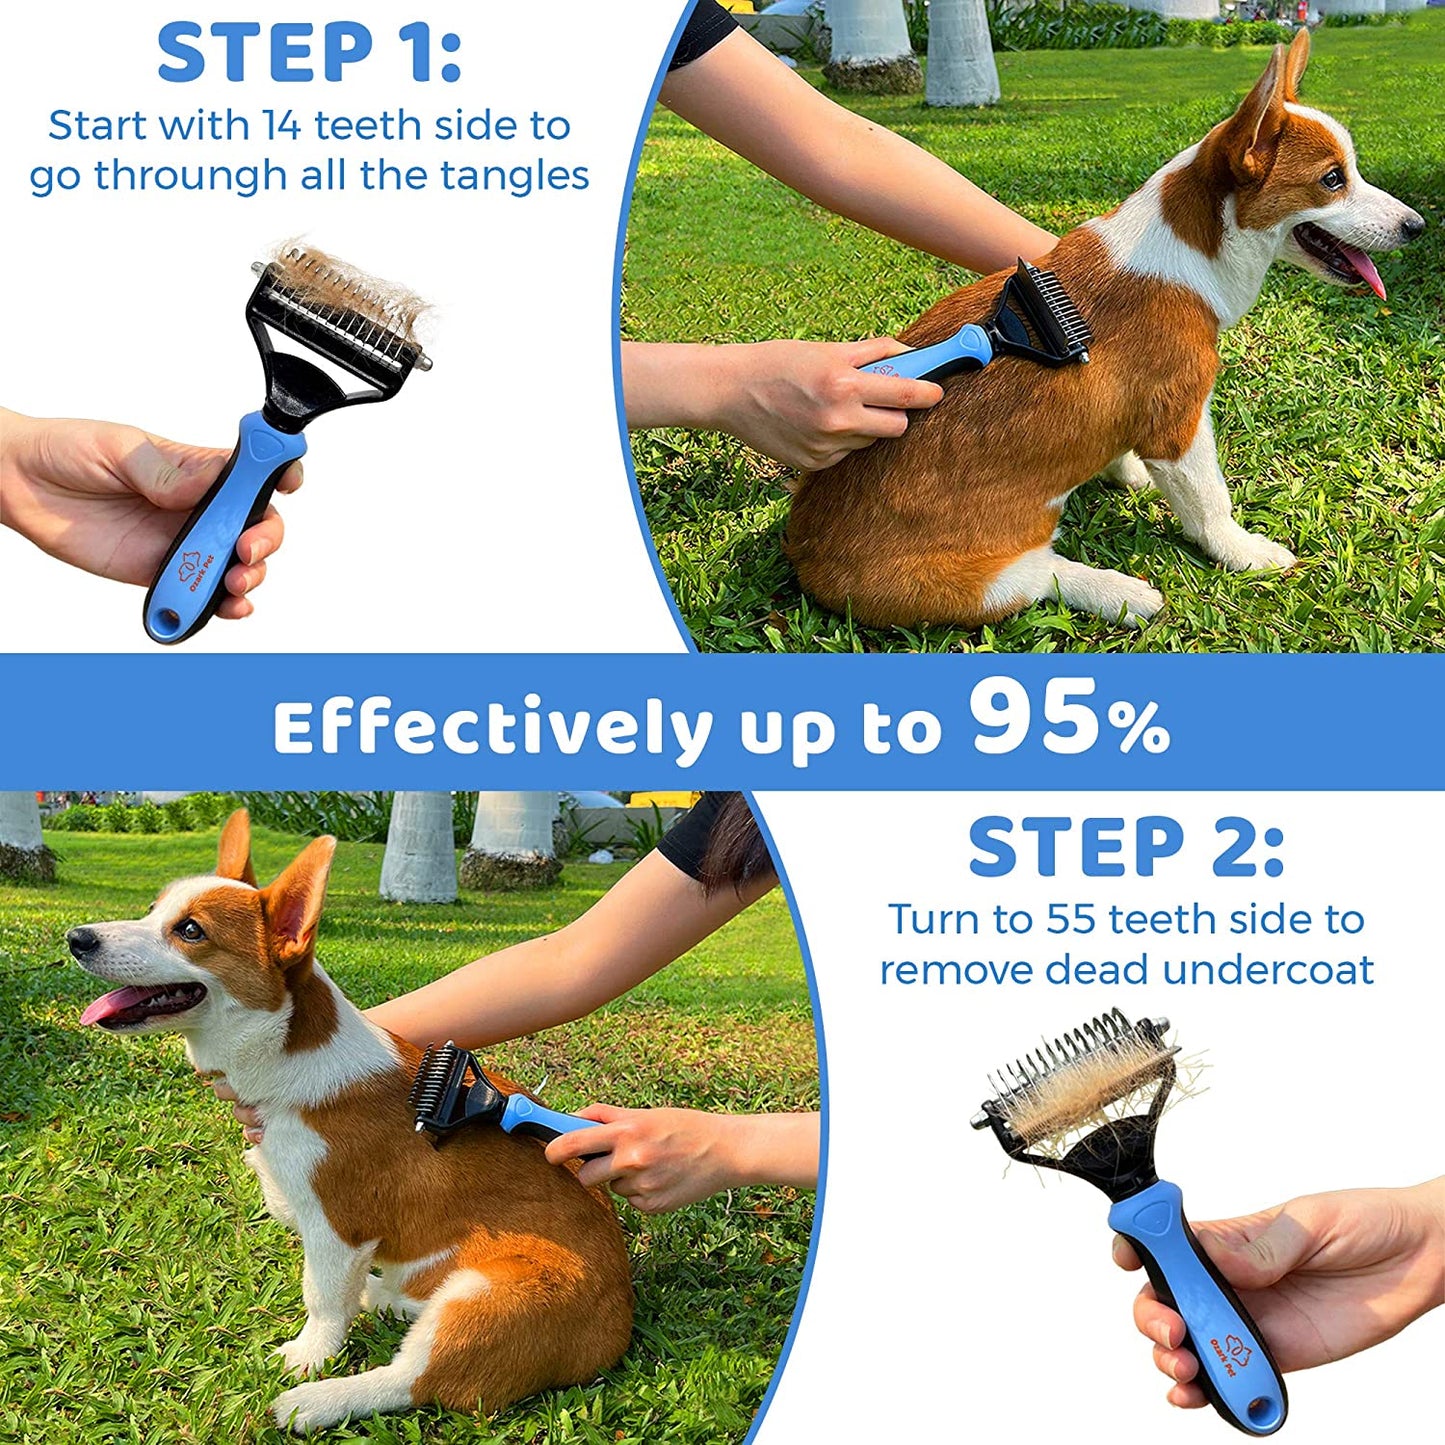 Dog Brush and Cat Brush-With Deshedding Brush, Dog Dematting Tools and 2 Side Shedding Brush Glove, Reduce Shedding up to 95%, for Short to Long Hair, Small to Medium Breeds by Ozark Pet (Blue Small)